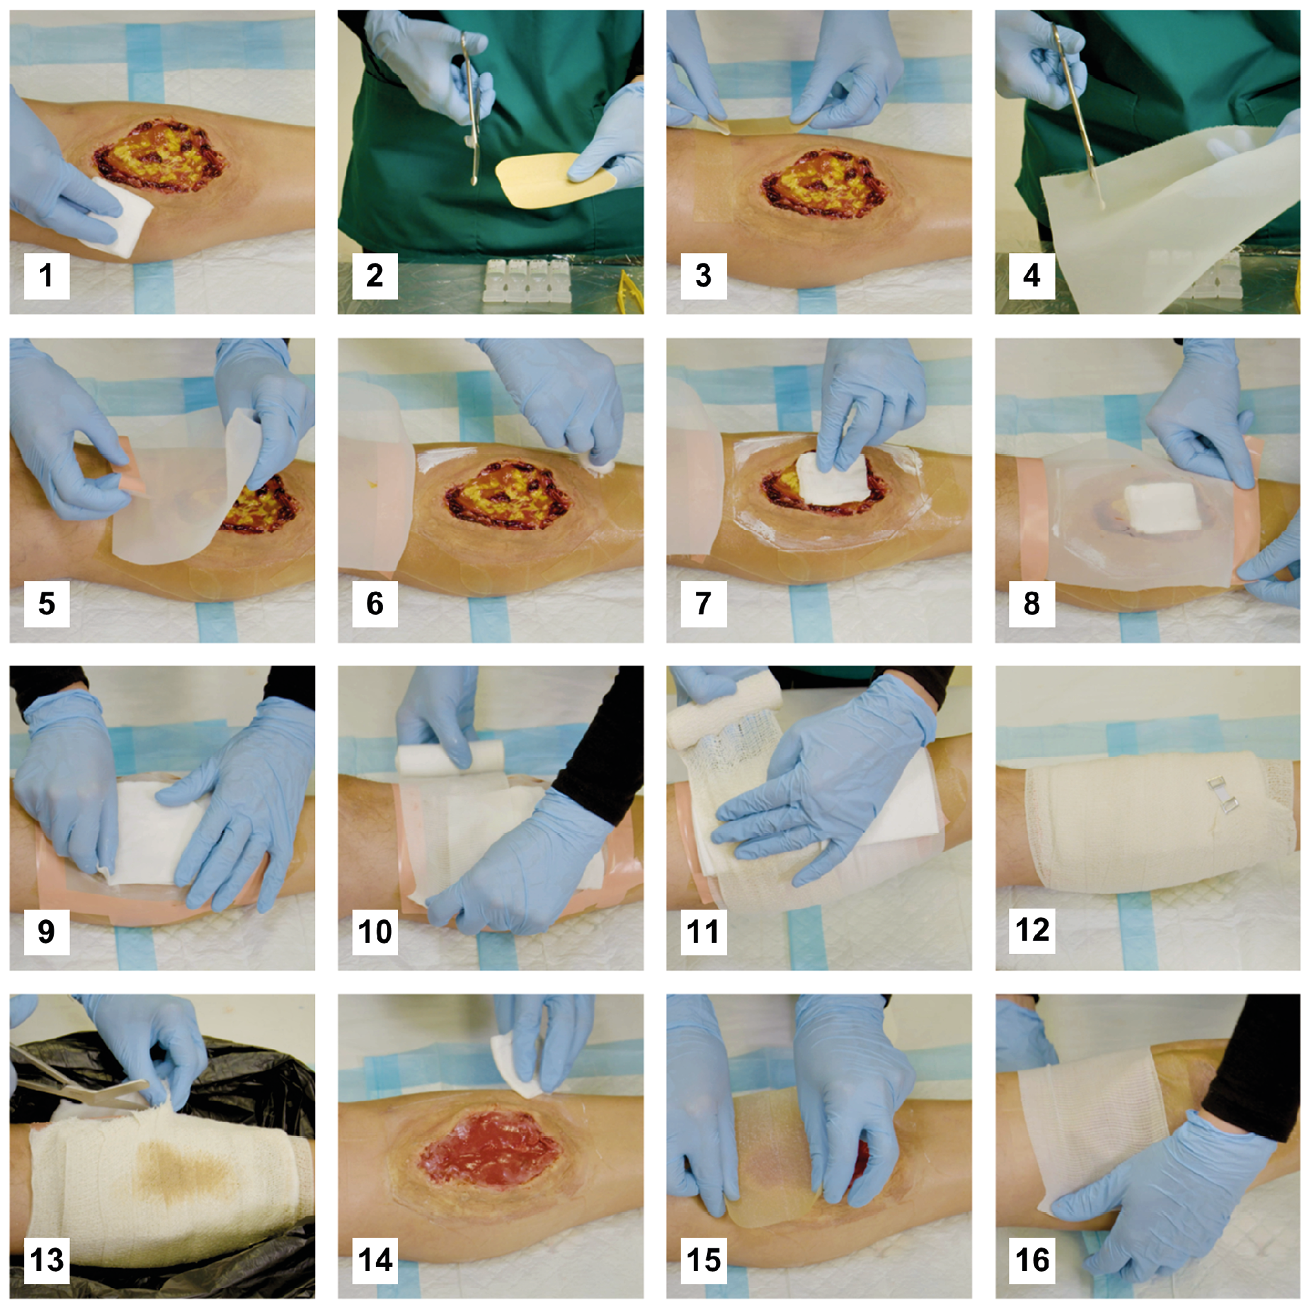 Sixteen photographs (1-16) show step-by-step how to construct a free-range maggot dressing with resources commonly available in modern clinical settings. The caption provides a detailed verbal description of the process.